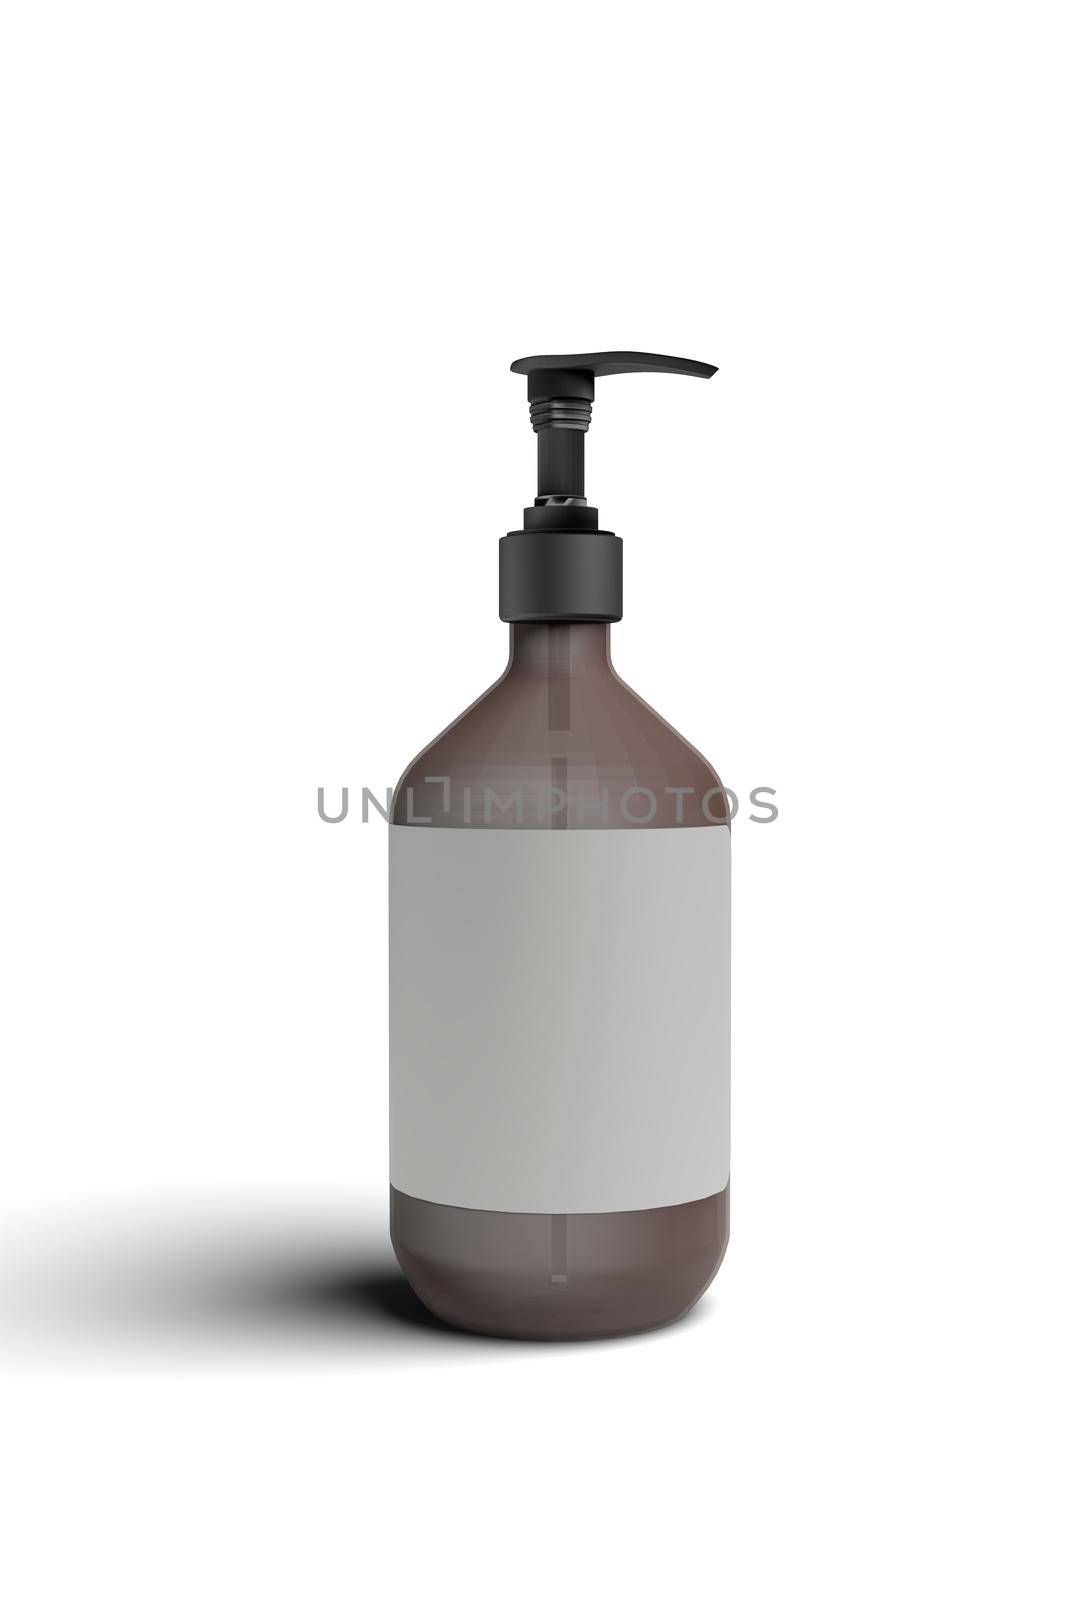 cosmetic bottle mockup with silver cap. realistic illustration. 3d rendering